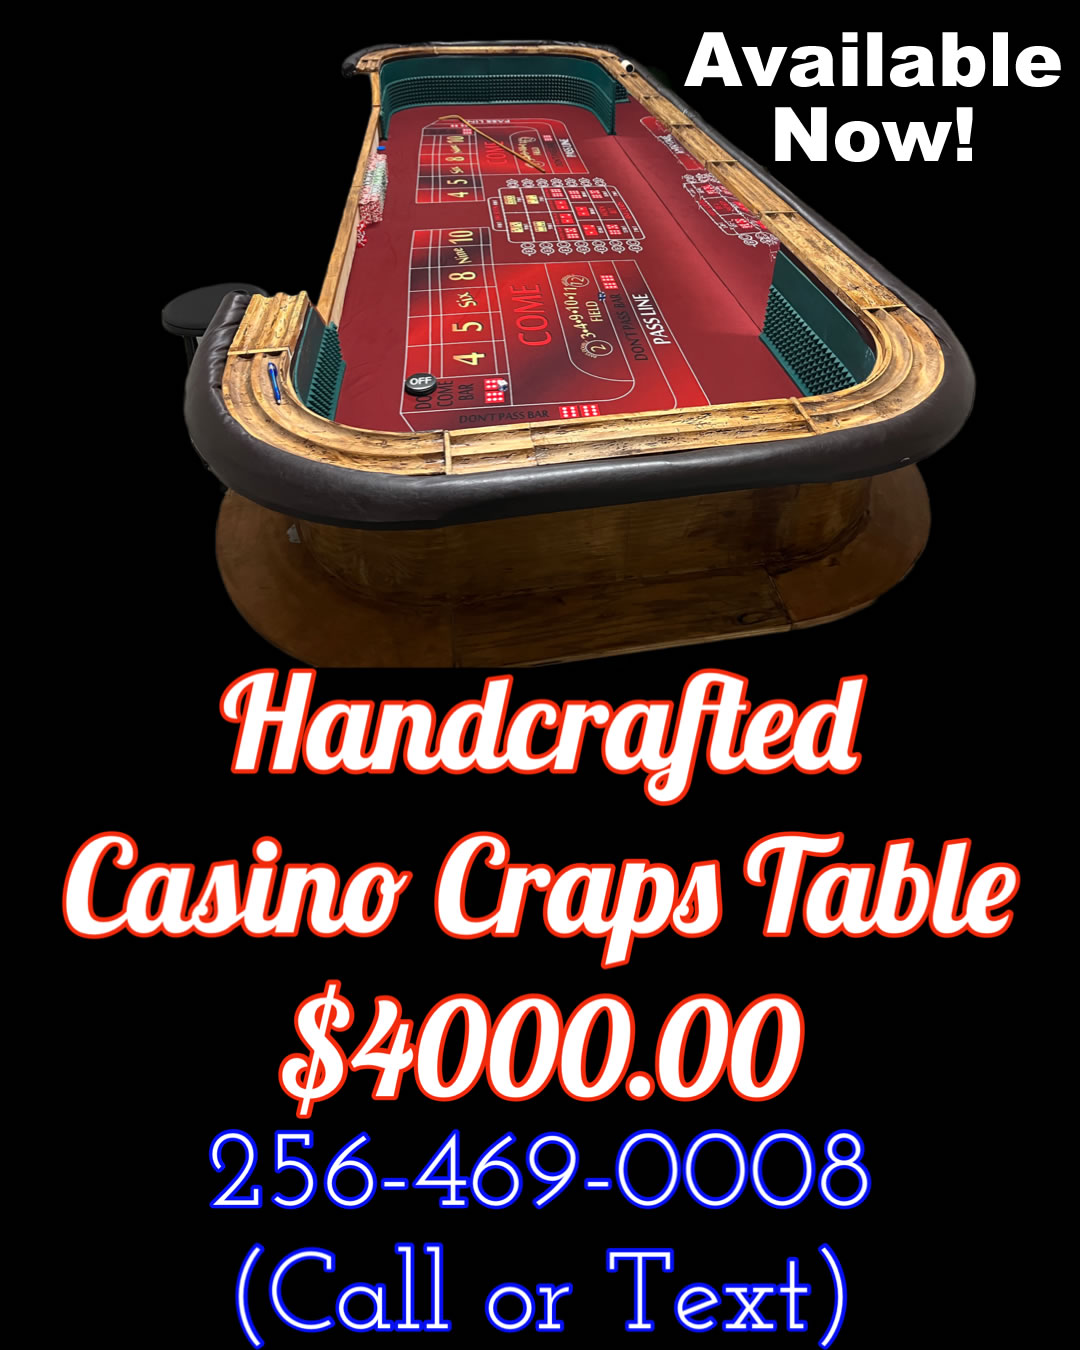 Casino Craps Table For Sale Handcrafted Craps Table For Sale